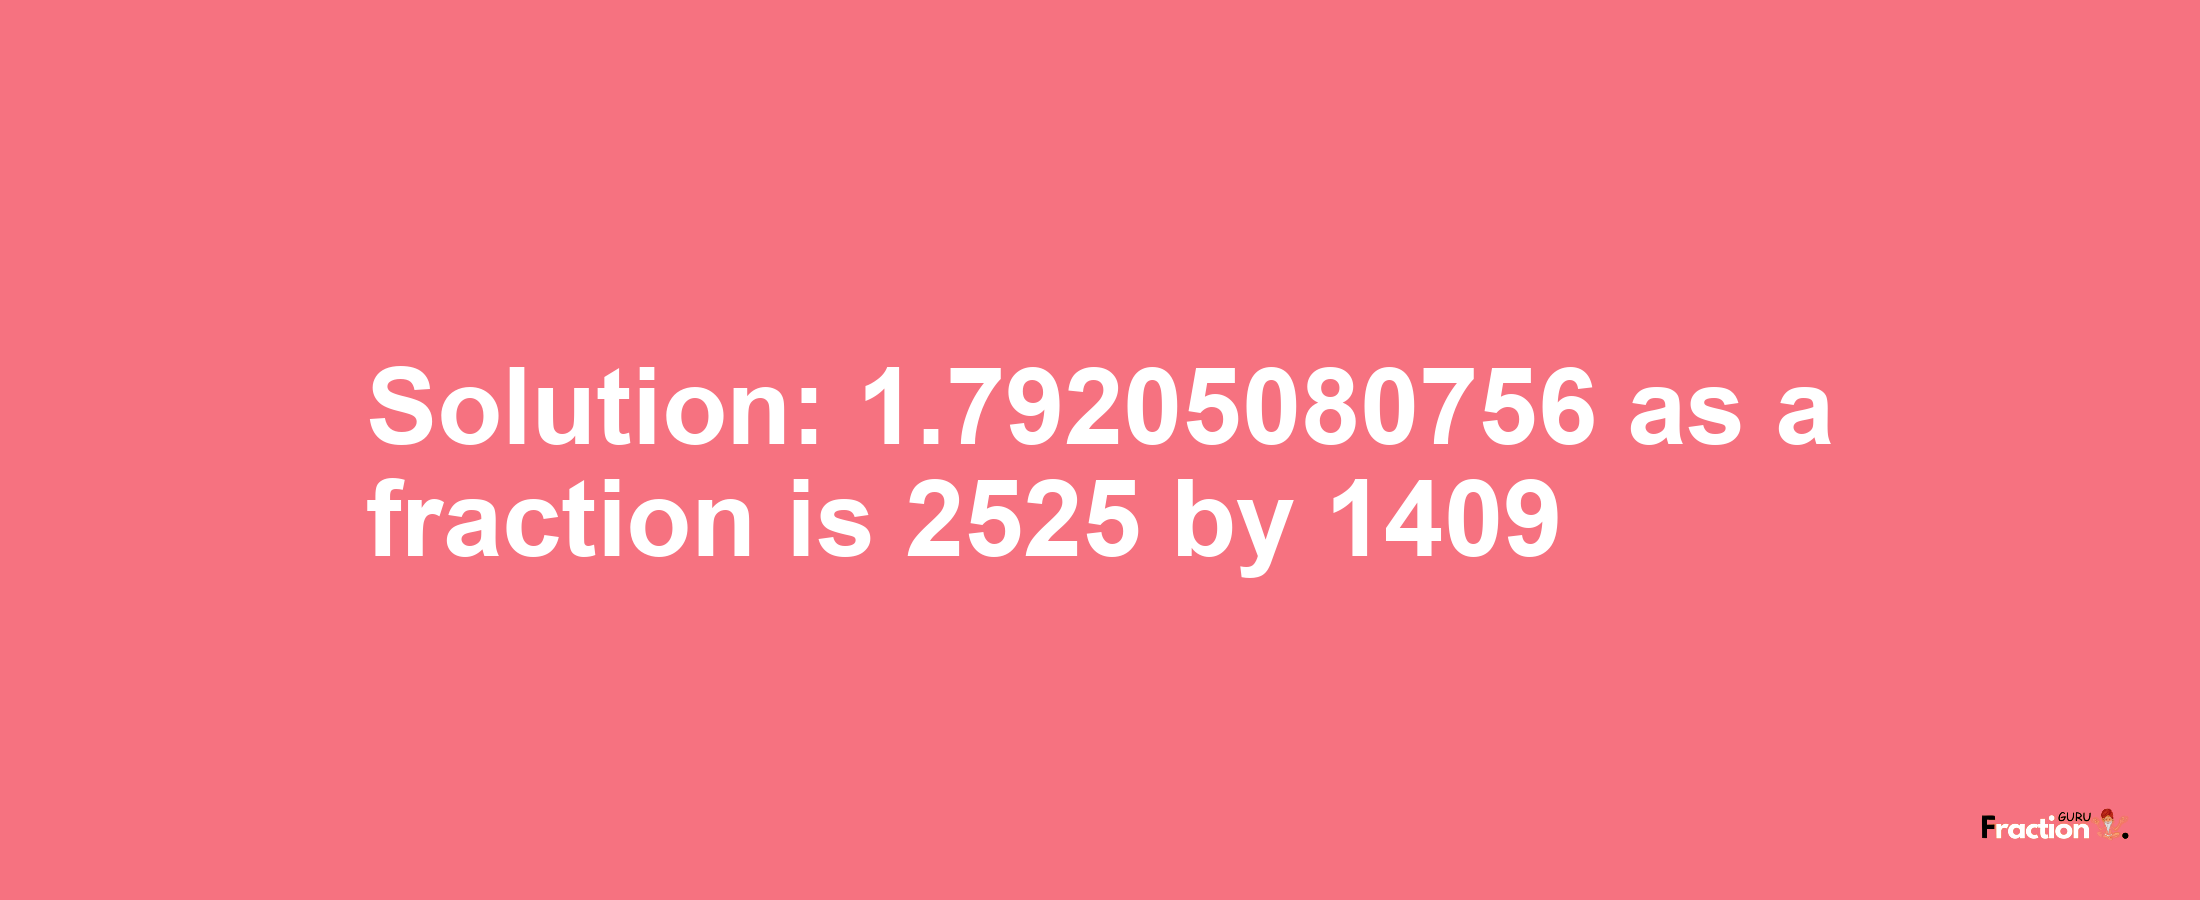 Solution:1.79205080756 as a fraction is 2525/1409